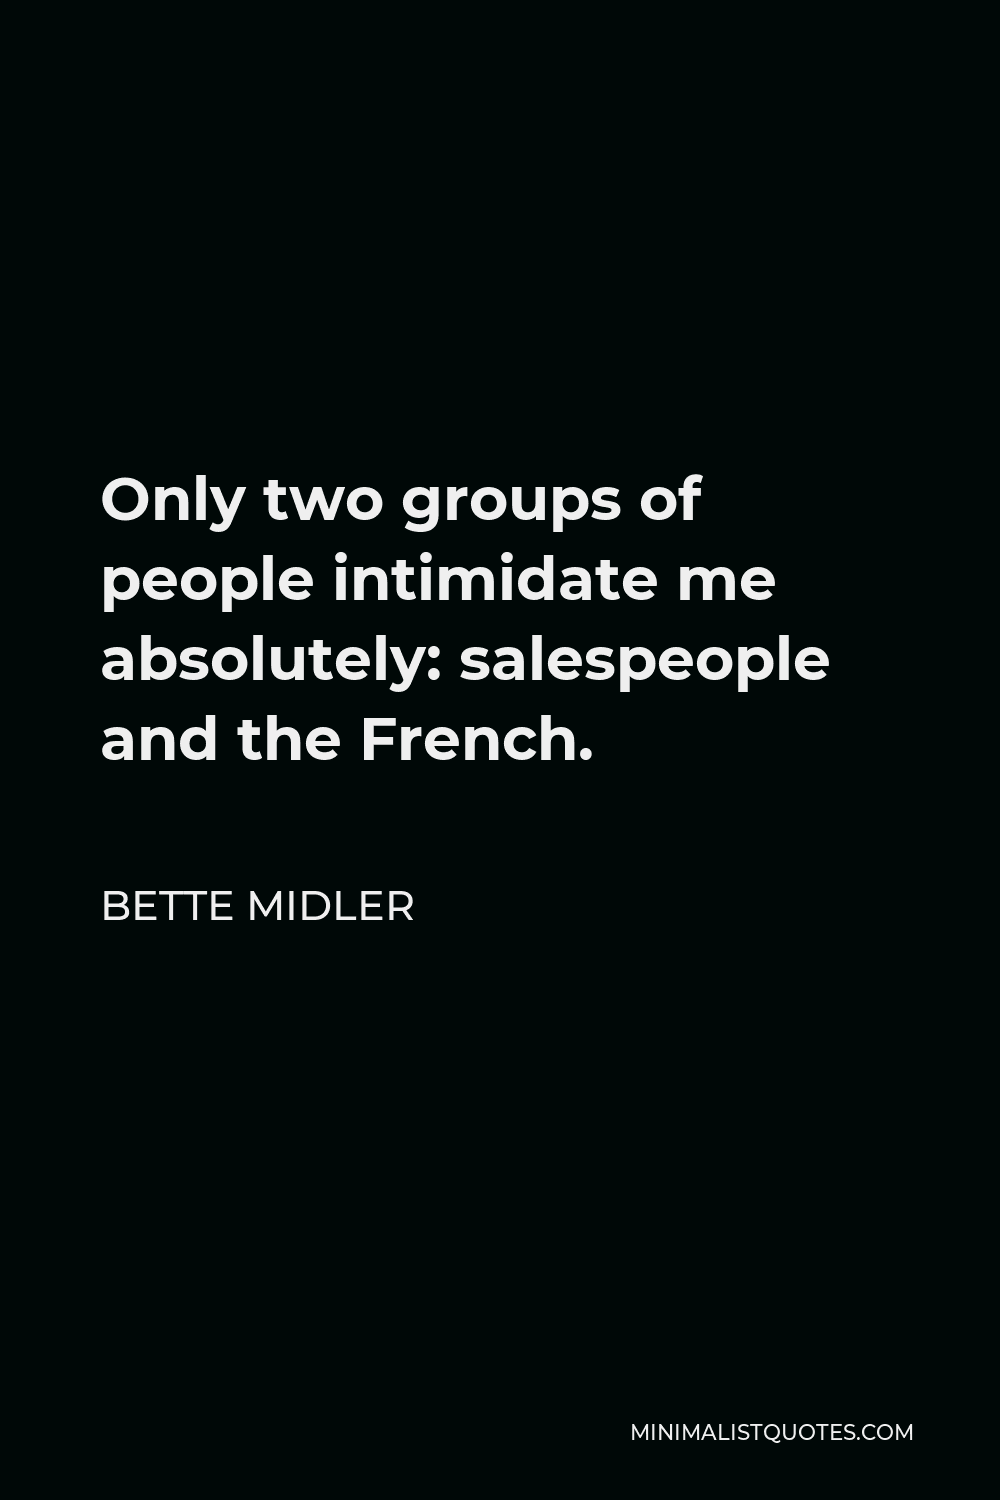 Bette Midler Quote - Only two groups of people intimidate me absolutely: salespeople and the French.